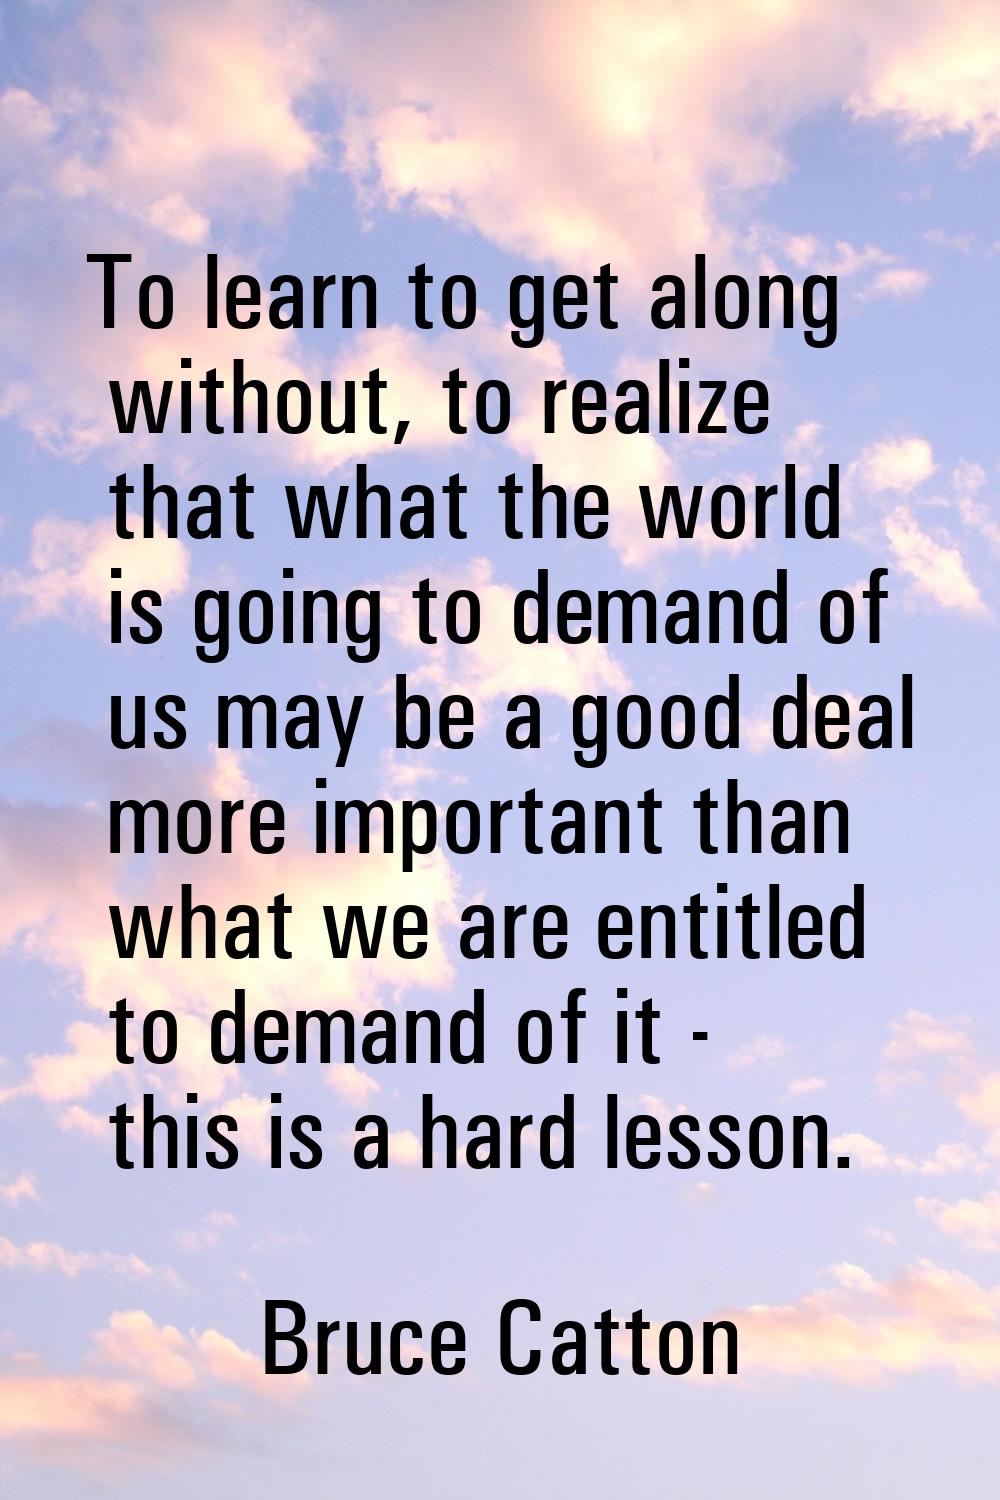 To learn to get along without, to realize that what the world is going to demand of us may be a goo